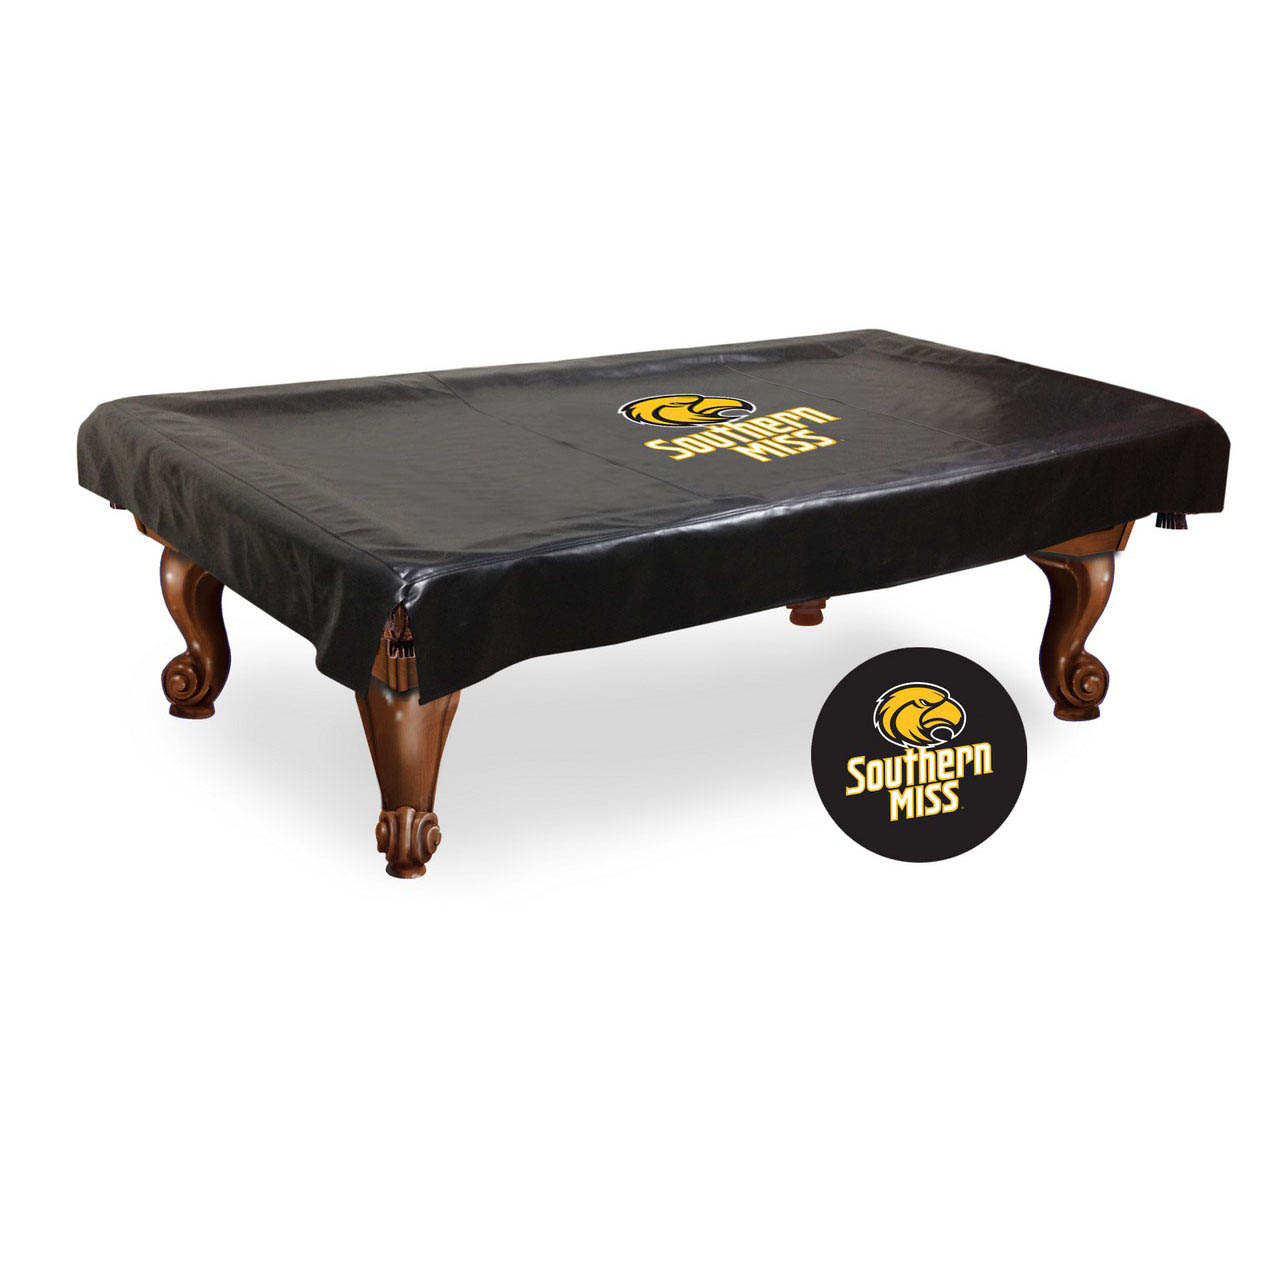 Southern Miss Billiard Table Cover